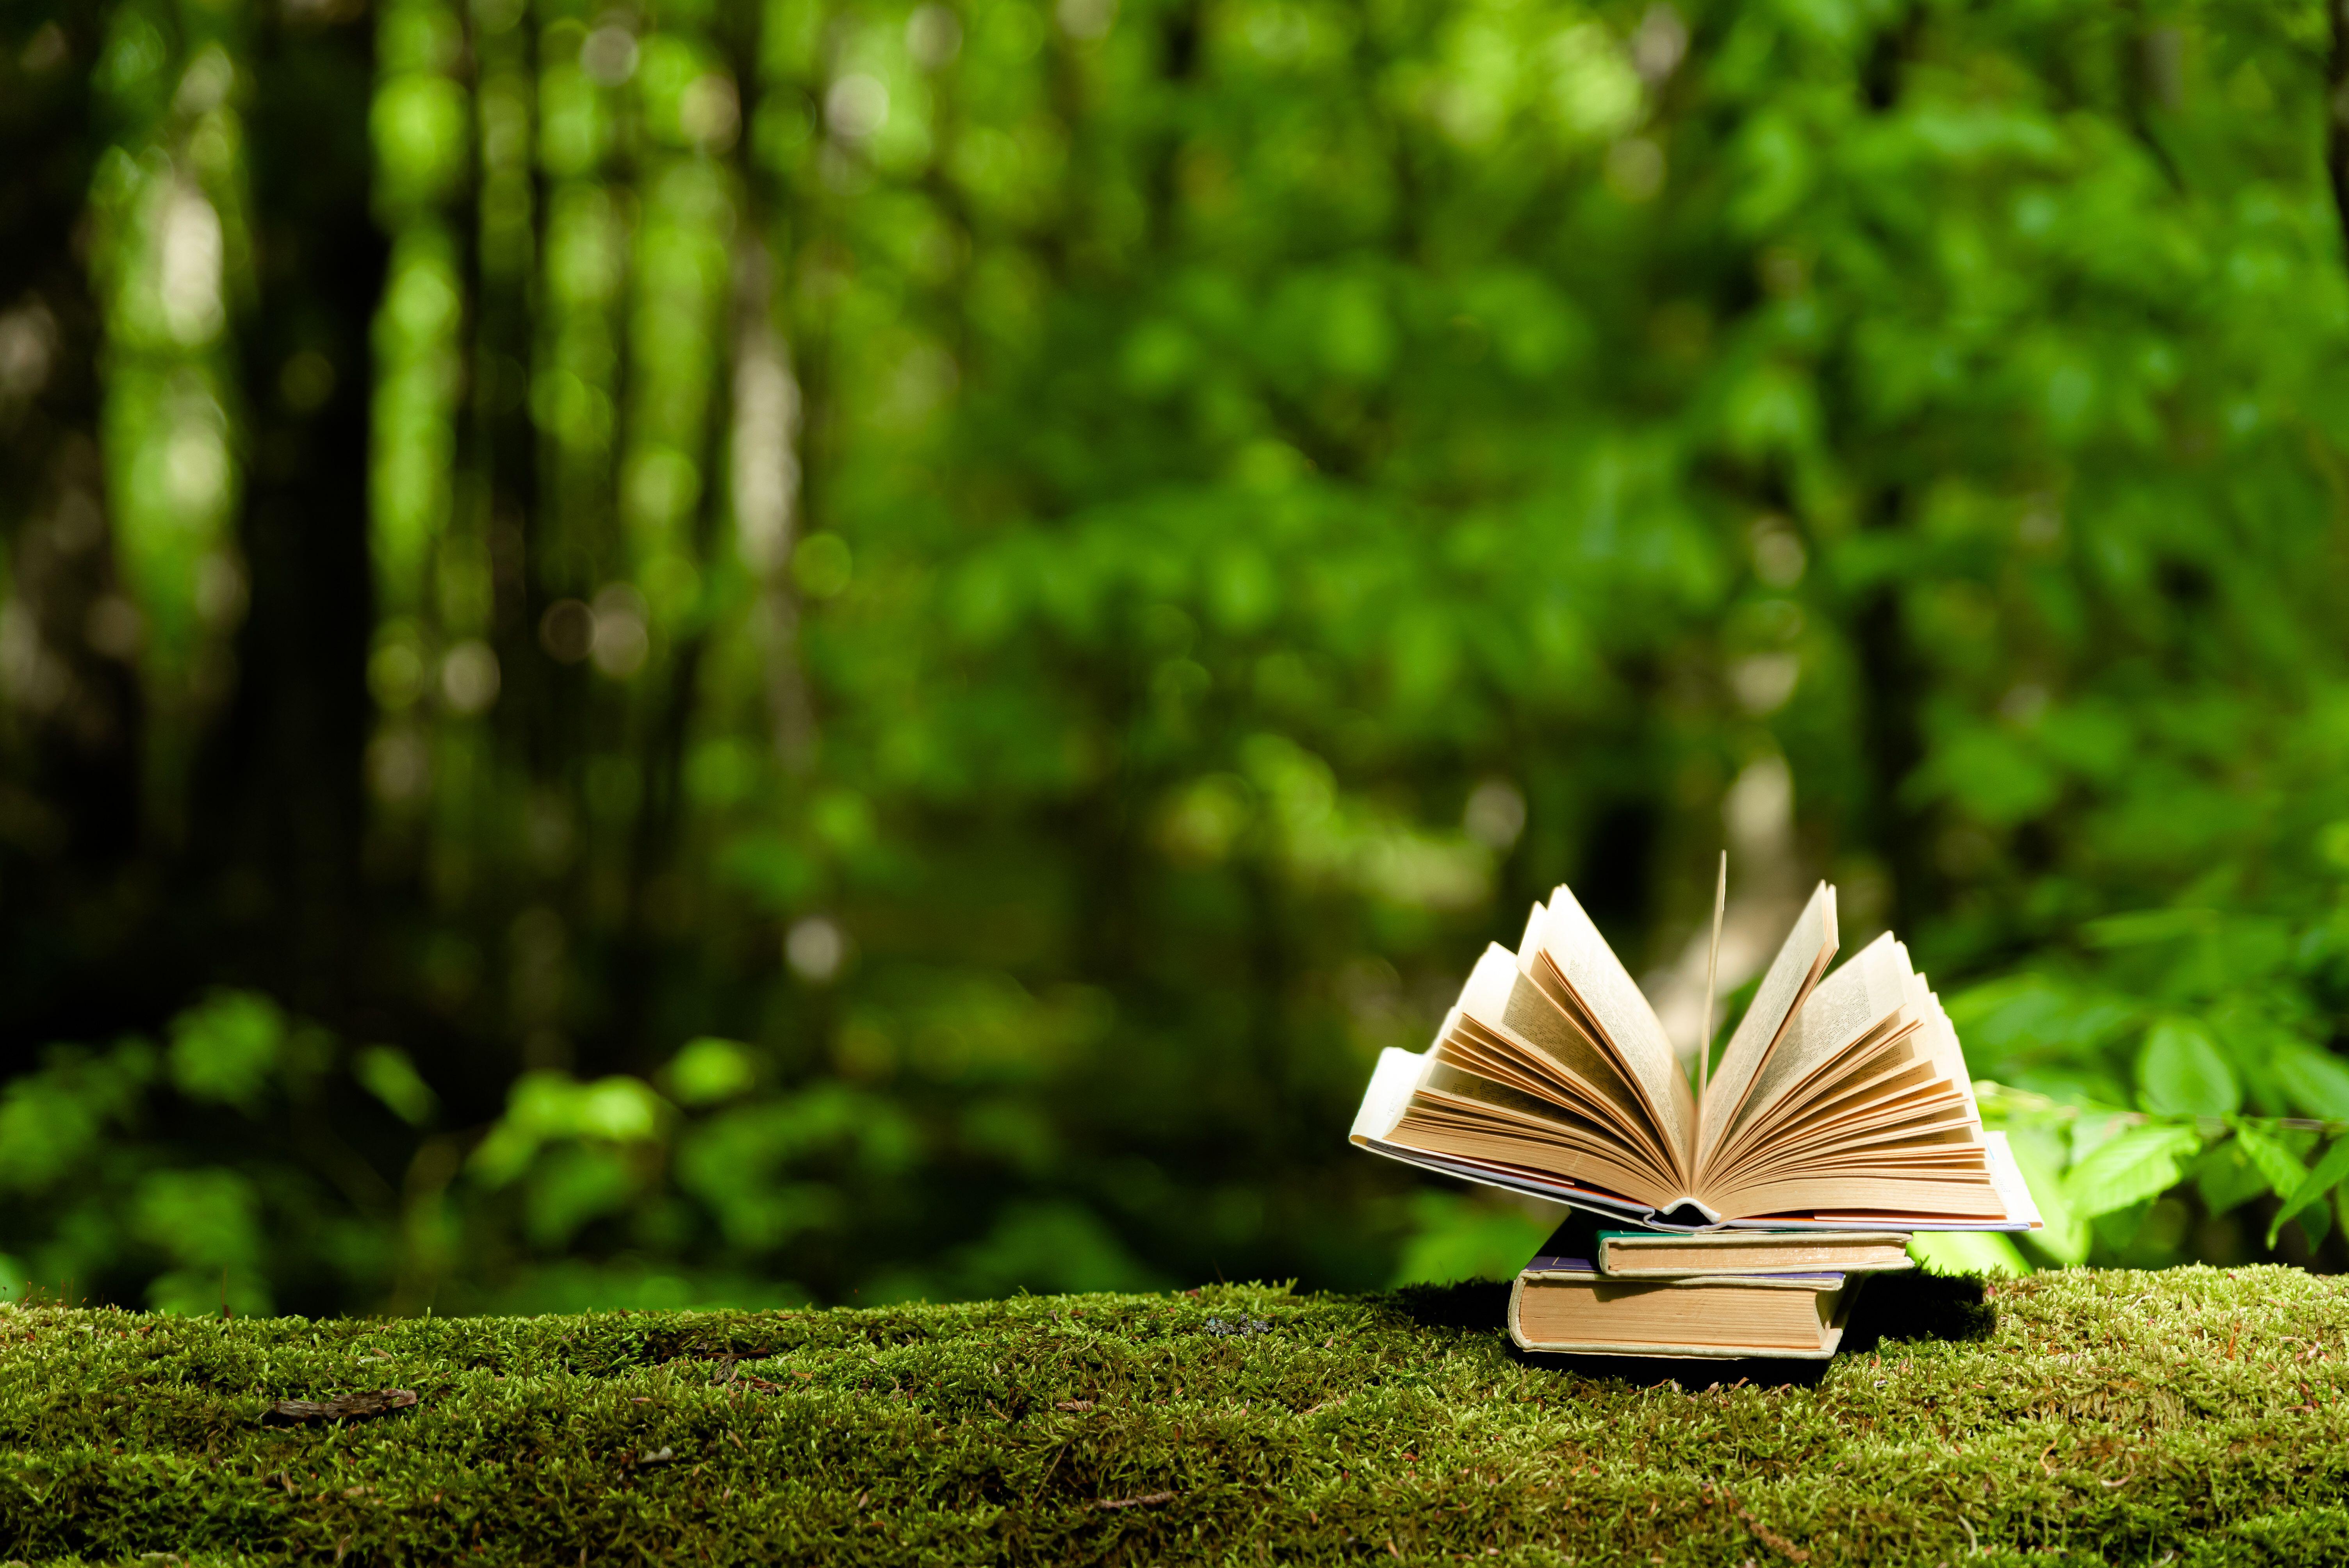 An open book rests on a moss-covered surface with a blurred green forest background,